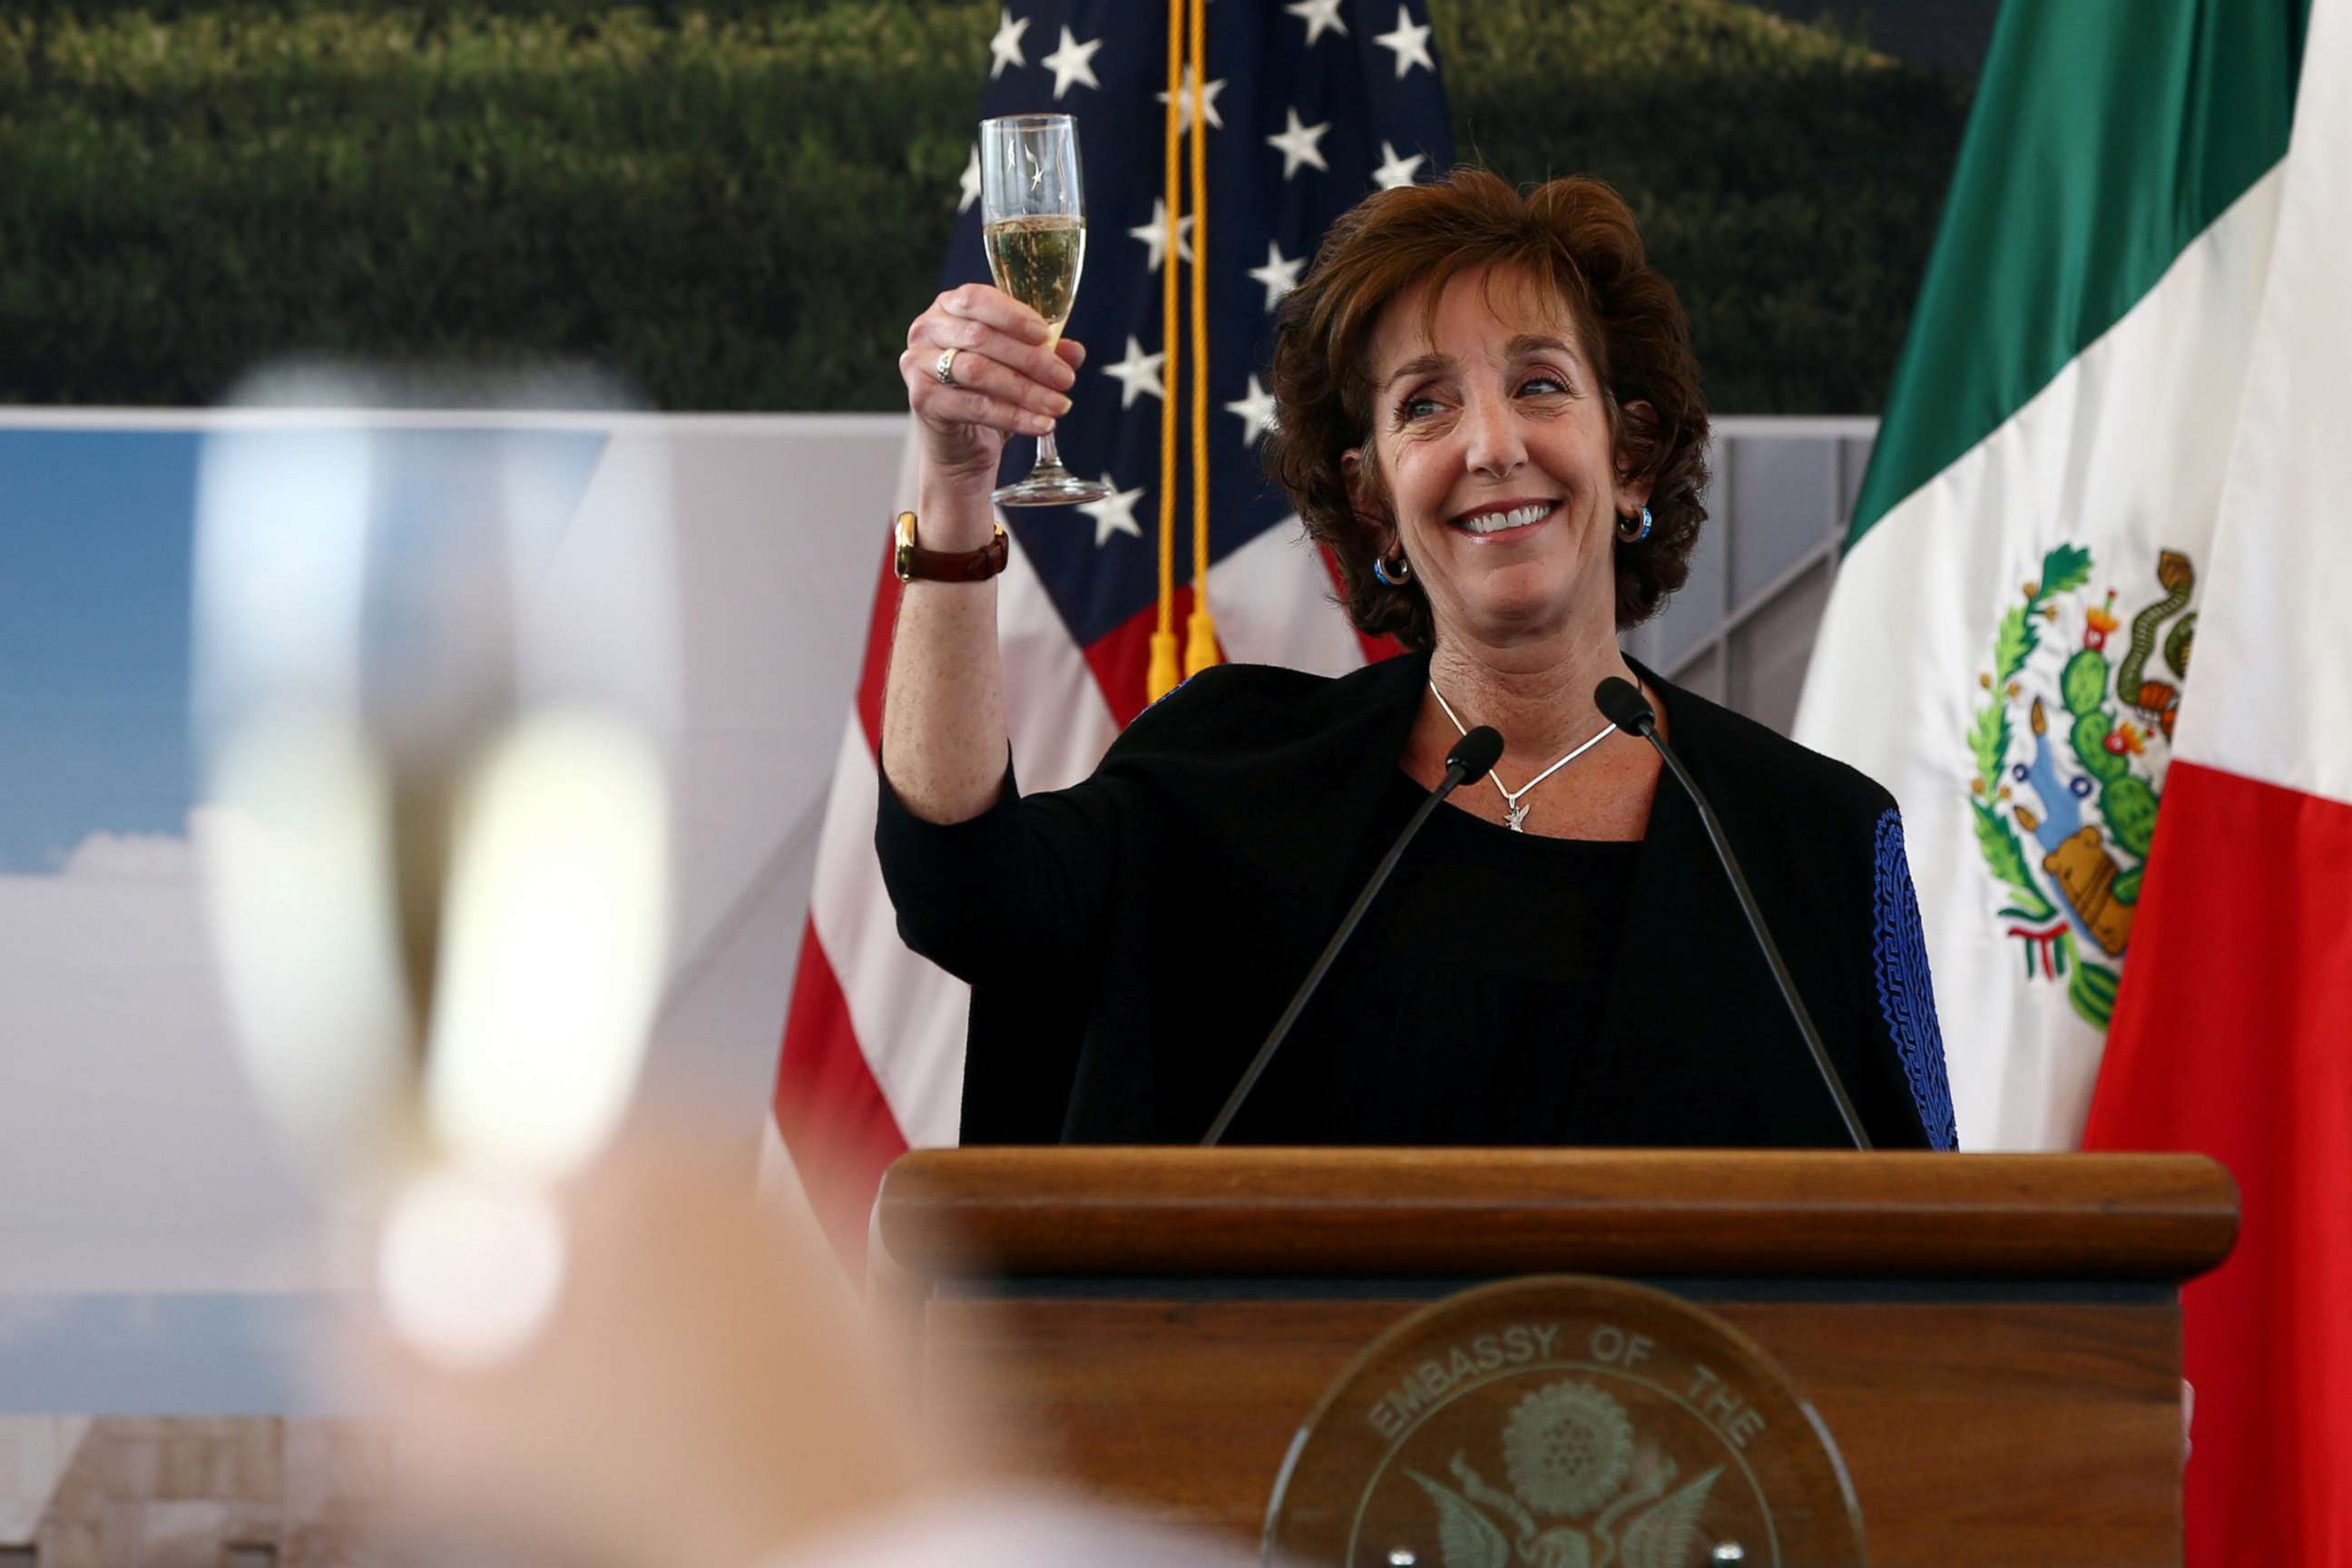 PHOTO: U.S. Ambassador to Mexico Roberta S. Jacobson raises her glass in a toast as she attends a ceremony to place the first stone of the new U.S. Embassy in Mexico City, Feb. 13, 2018. 